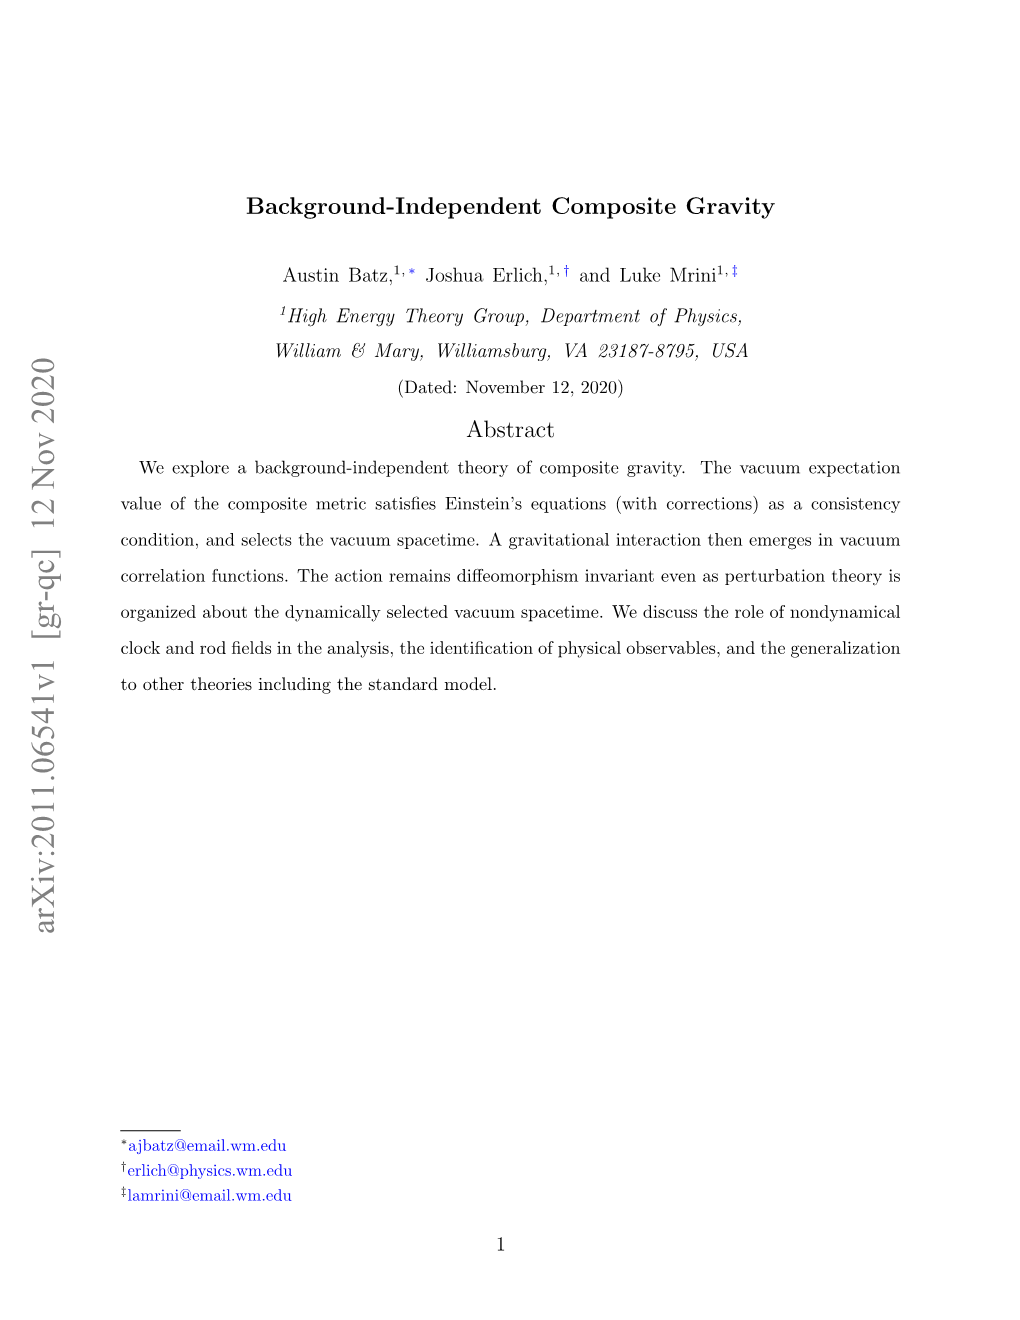 Background-Independent Composite Gravity